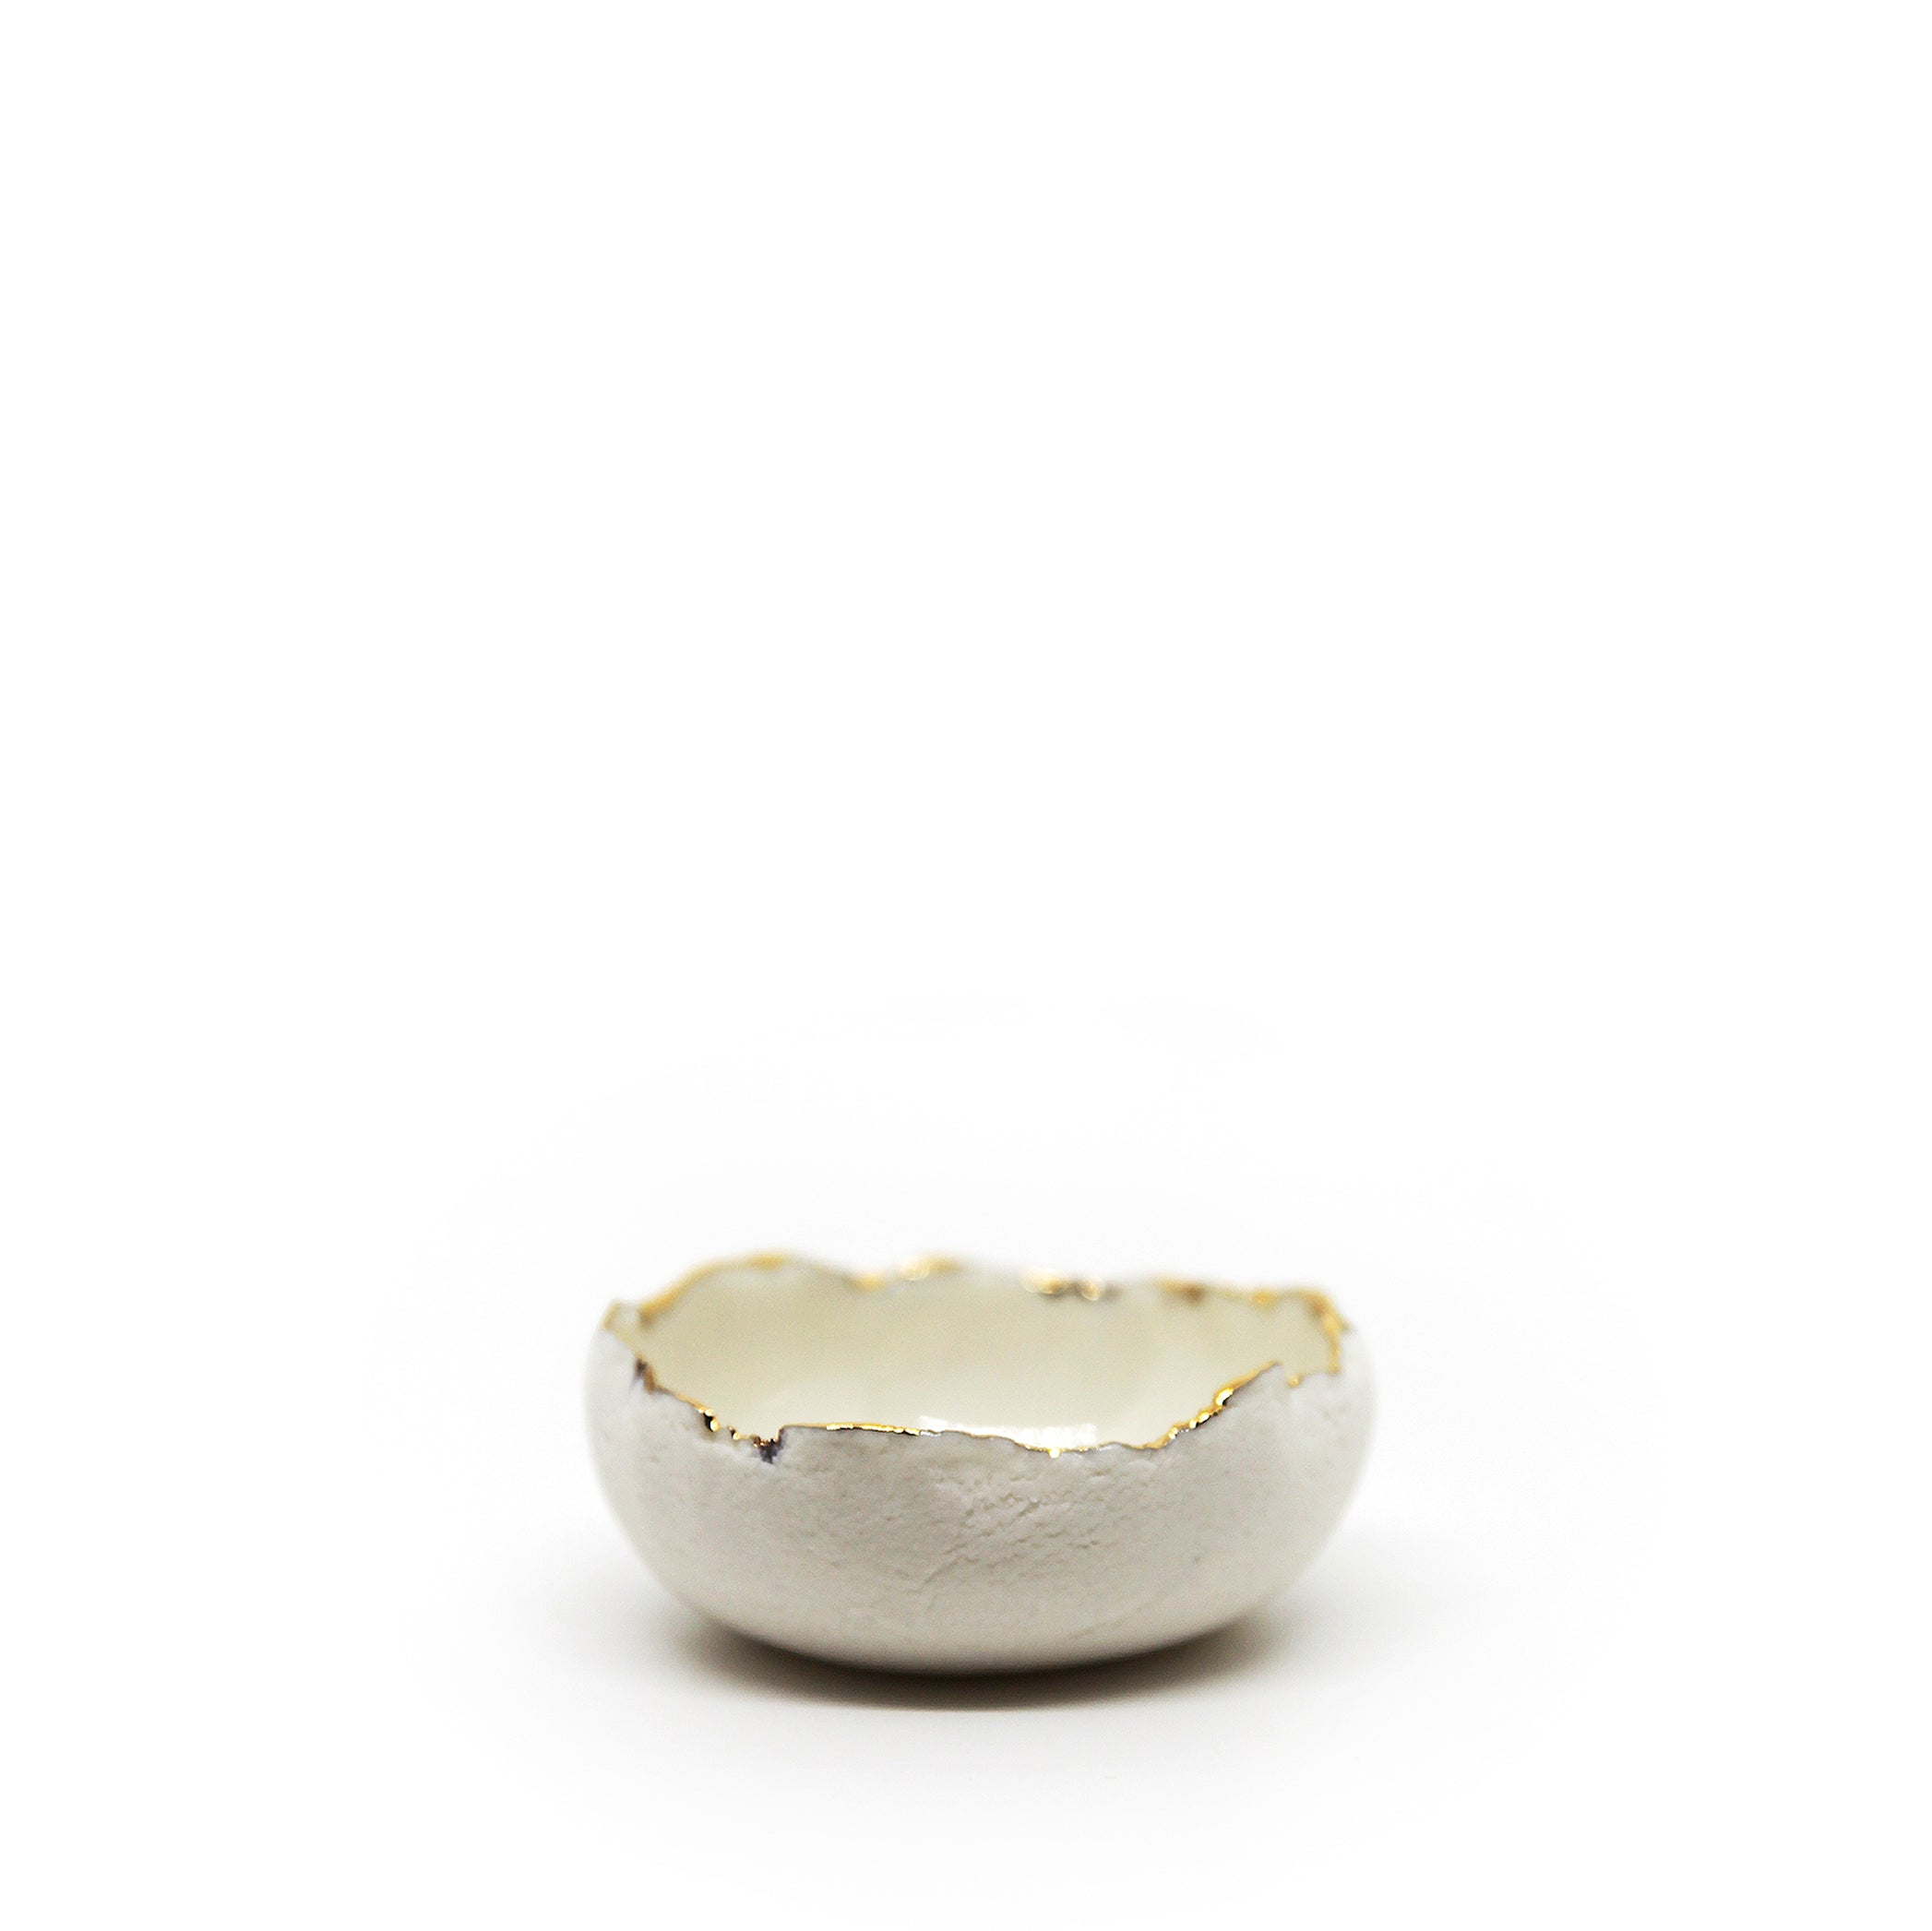 HB Jagged Bowls with Lips, 7cm